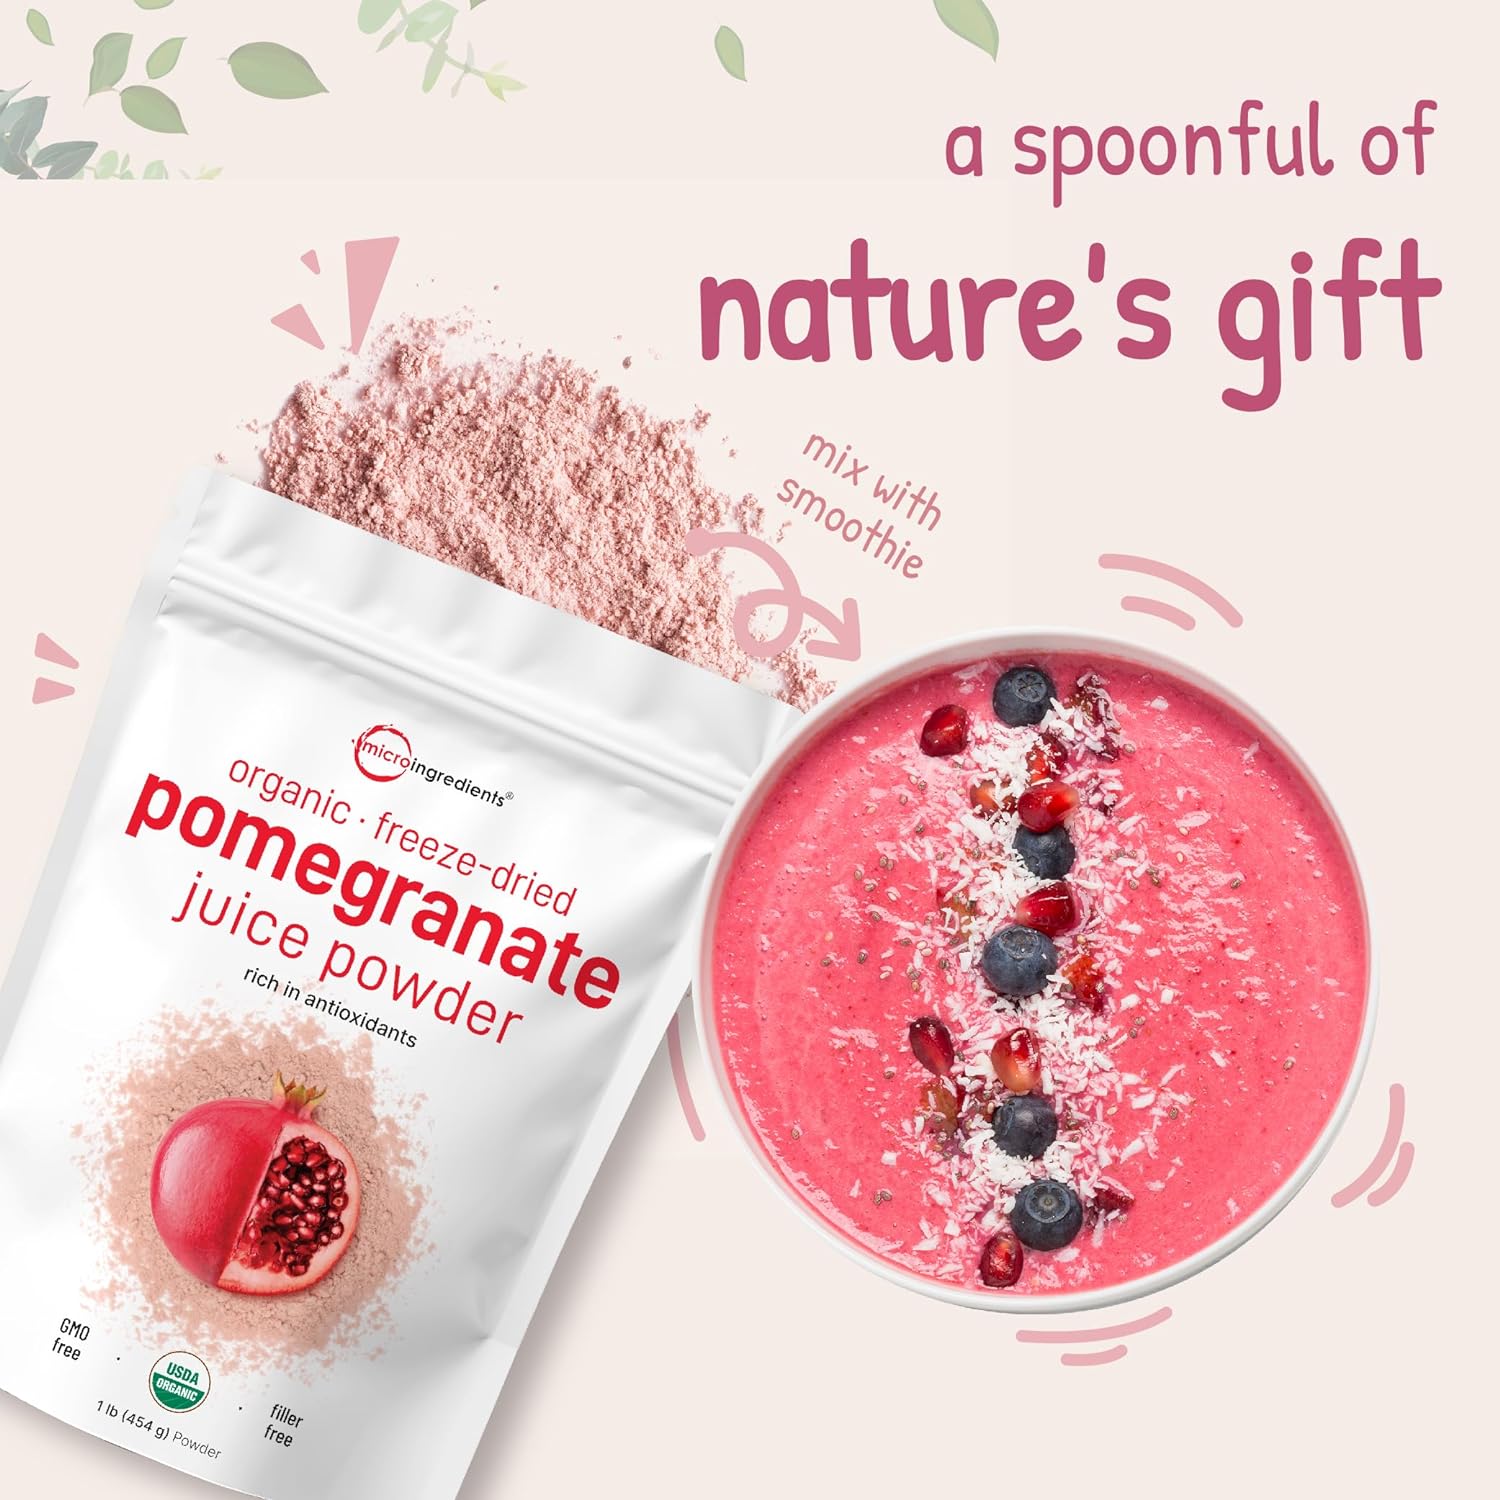 Organic Pomegranate Juice Powder, 1 Pound | 100% Natural Fruit Powder | Freeze Dried & Cold Pressed | No Sugar & Additives | Great Flavor for Drinks, Smoothie, & Beverages | Non-GMO & Vegan Friendly : Grocery & Gourmet Food